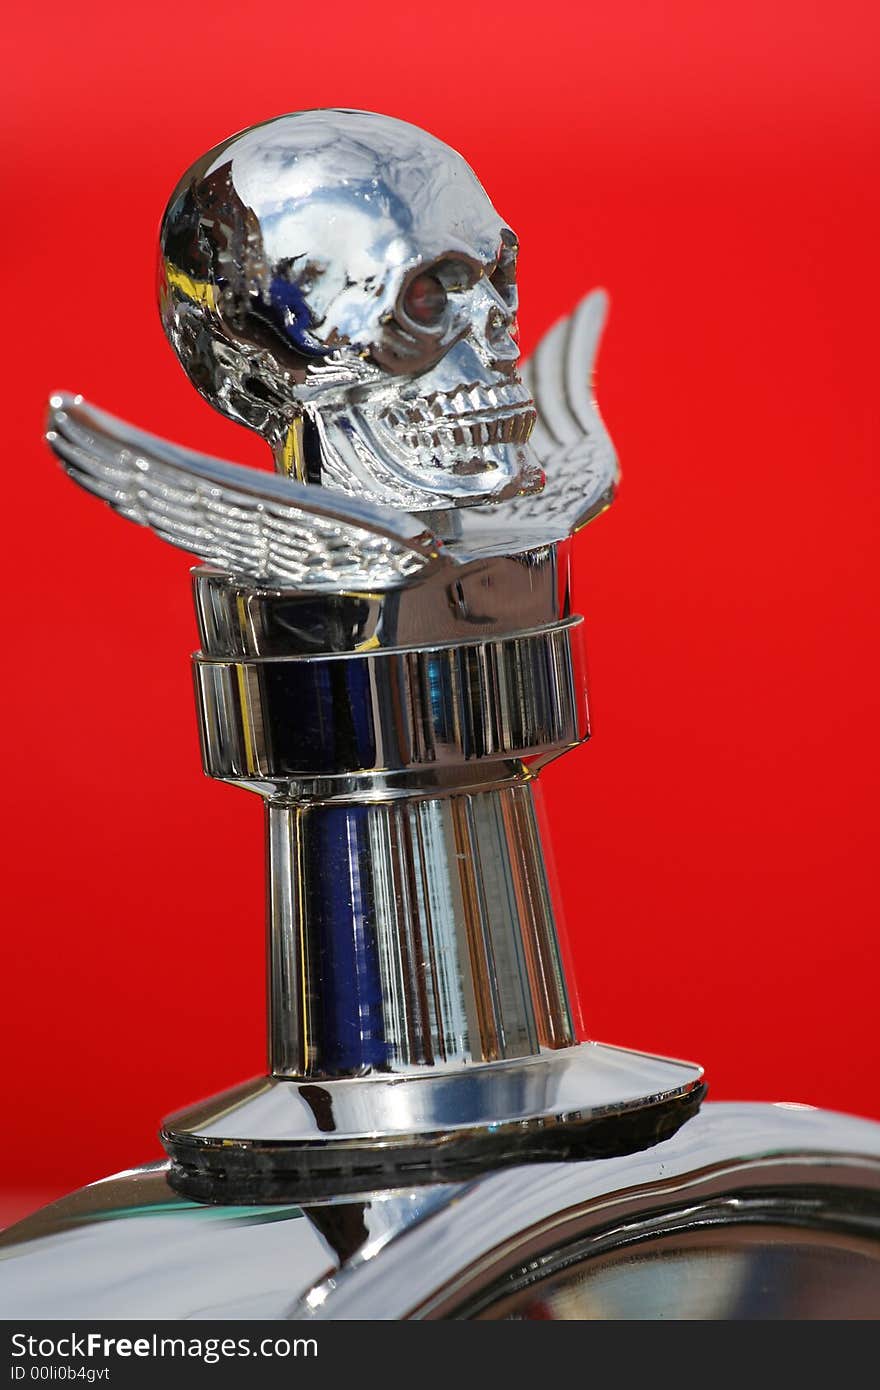 Cool skull and wings decorative radiator cap on a hot rod at a car show in Kansas.